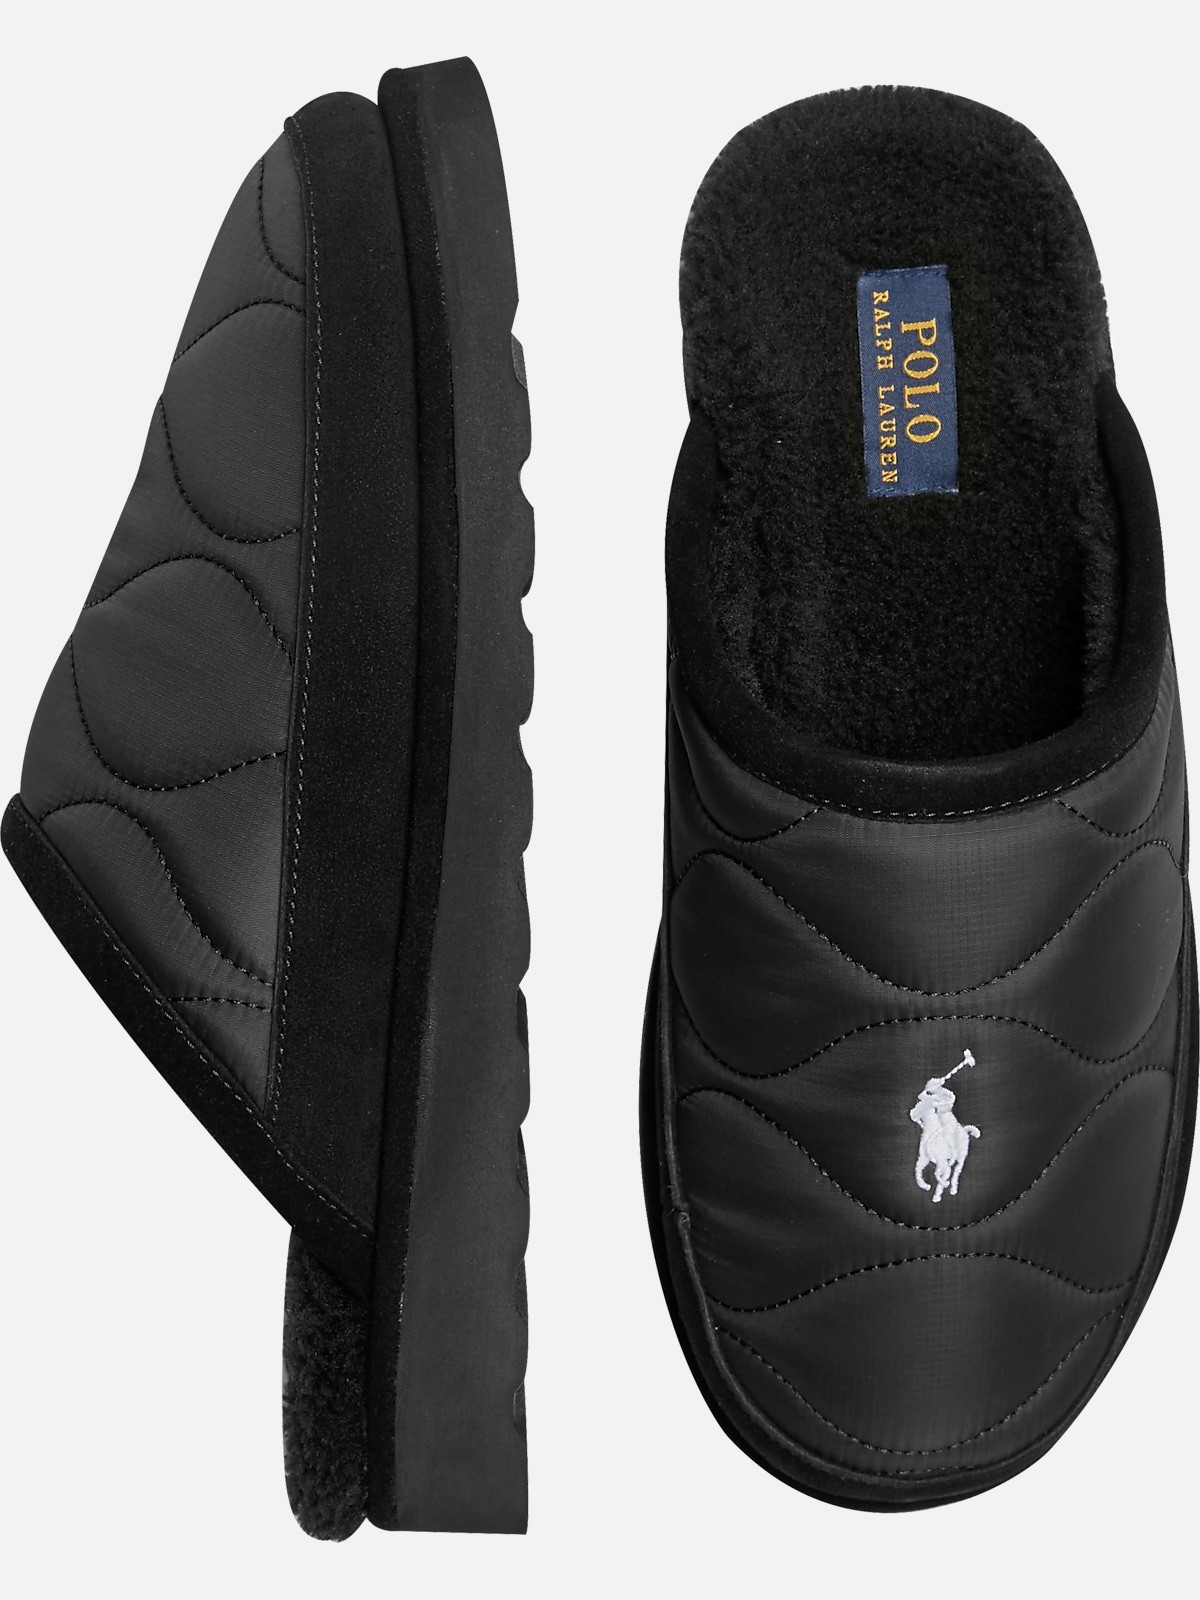 Polo Ralph Lauren Clog Slippers | Loafers & Slip-Ons| Men's Wearhouse